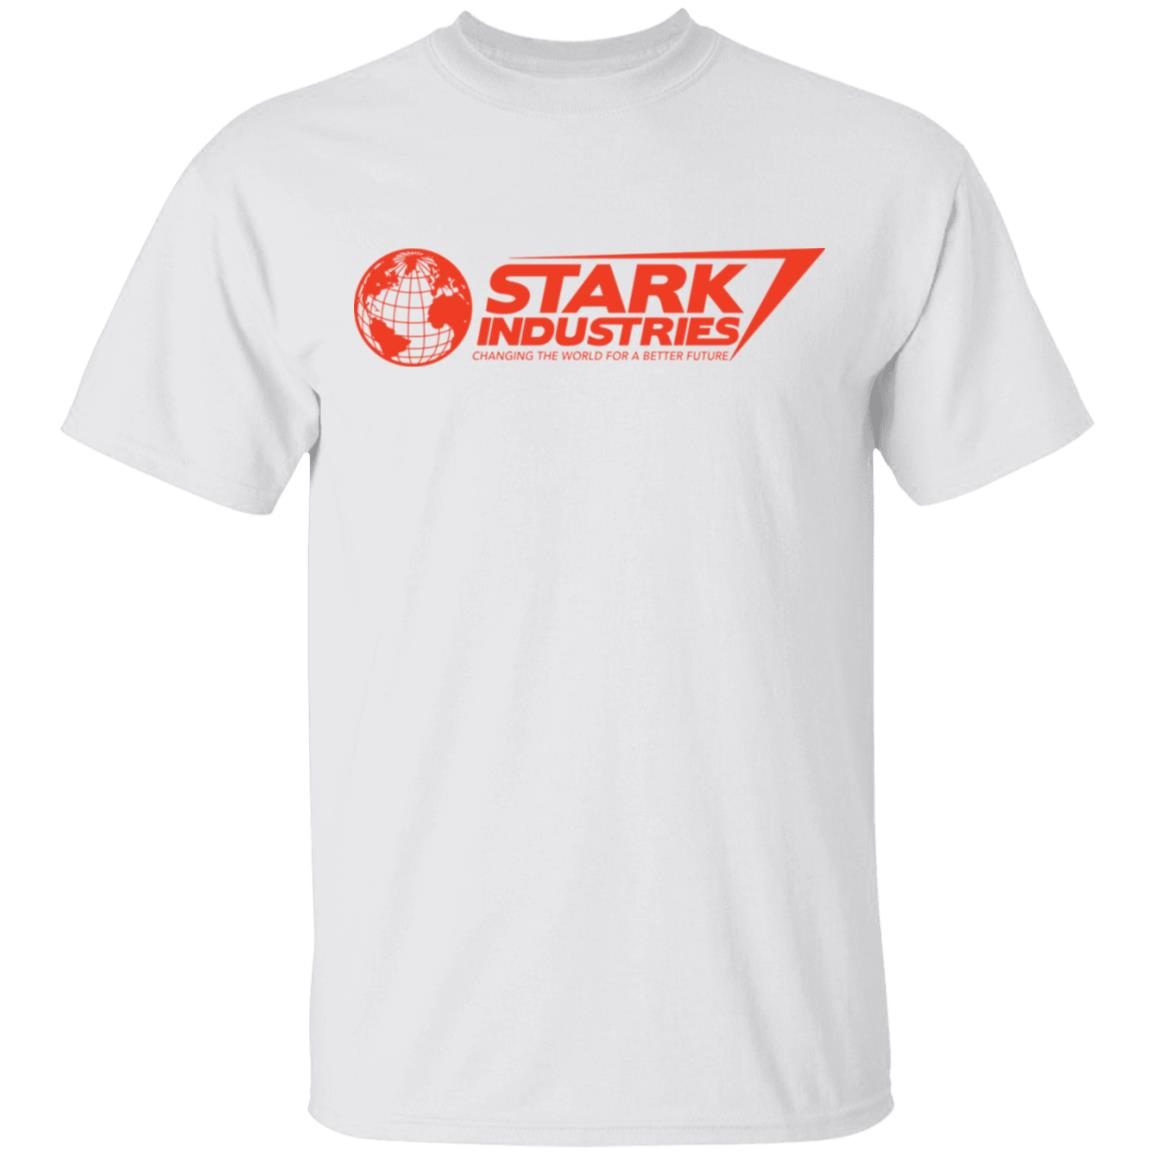 Stark industries changing the world for a better future 1